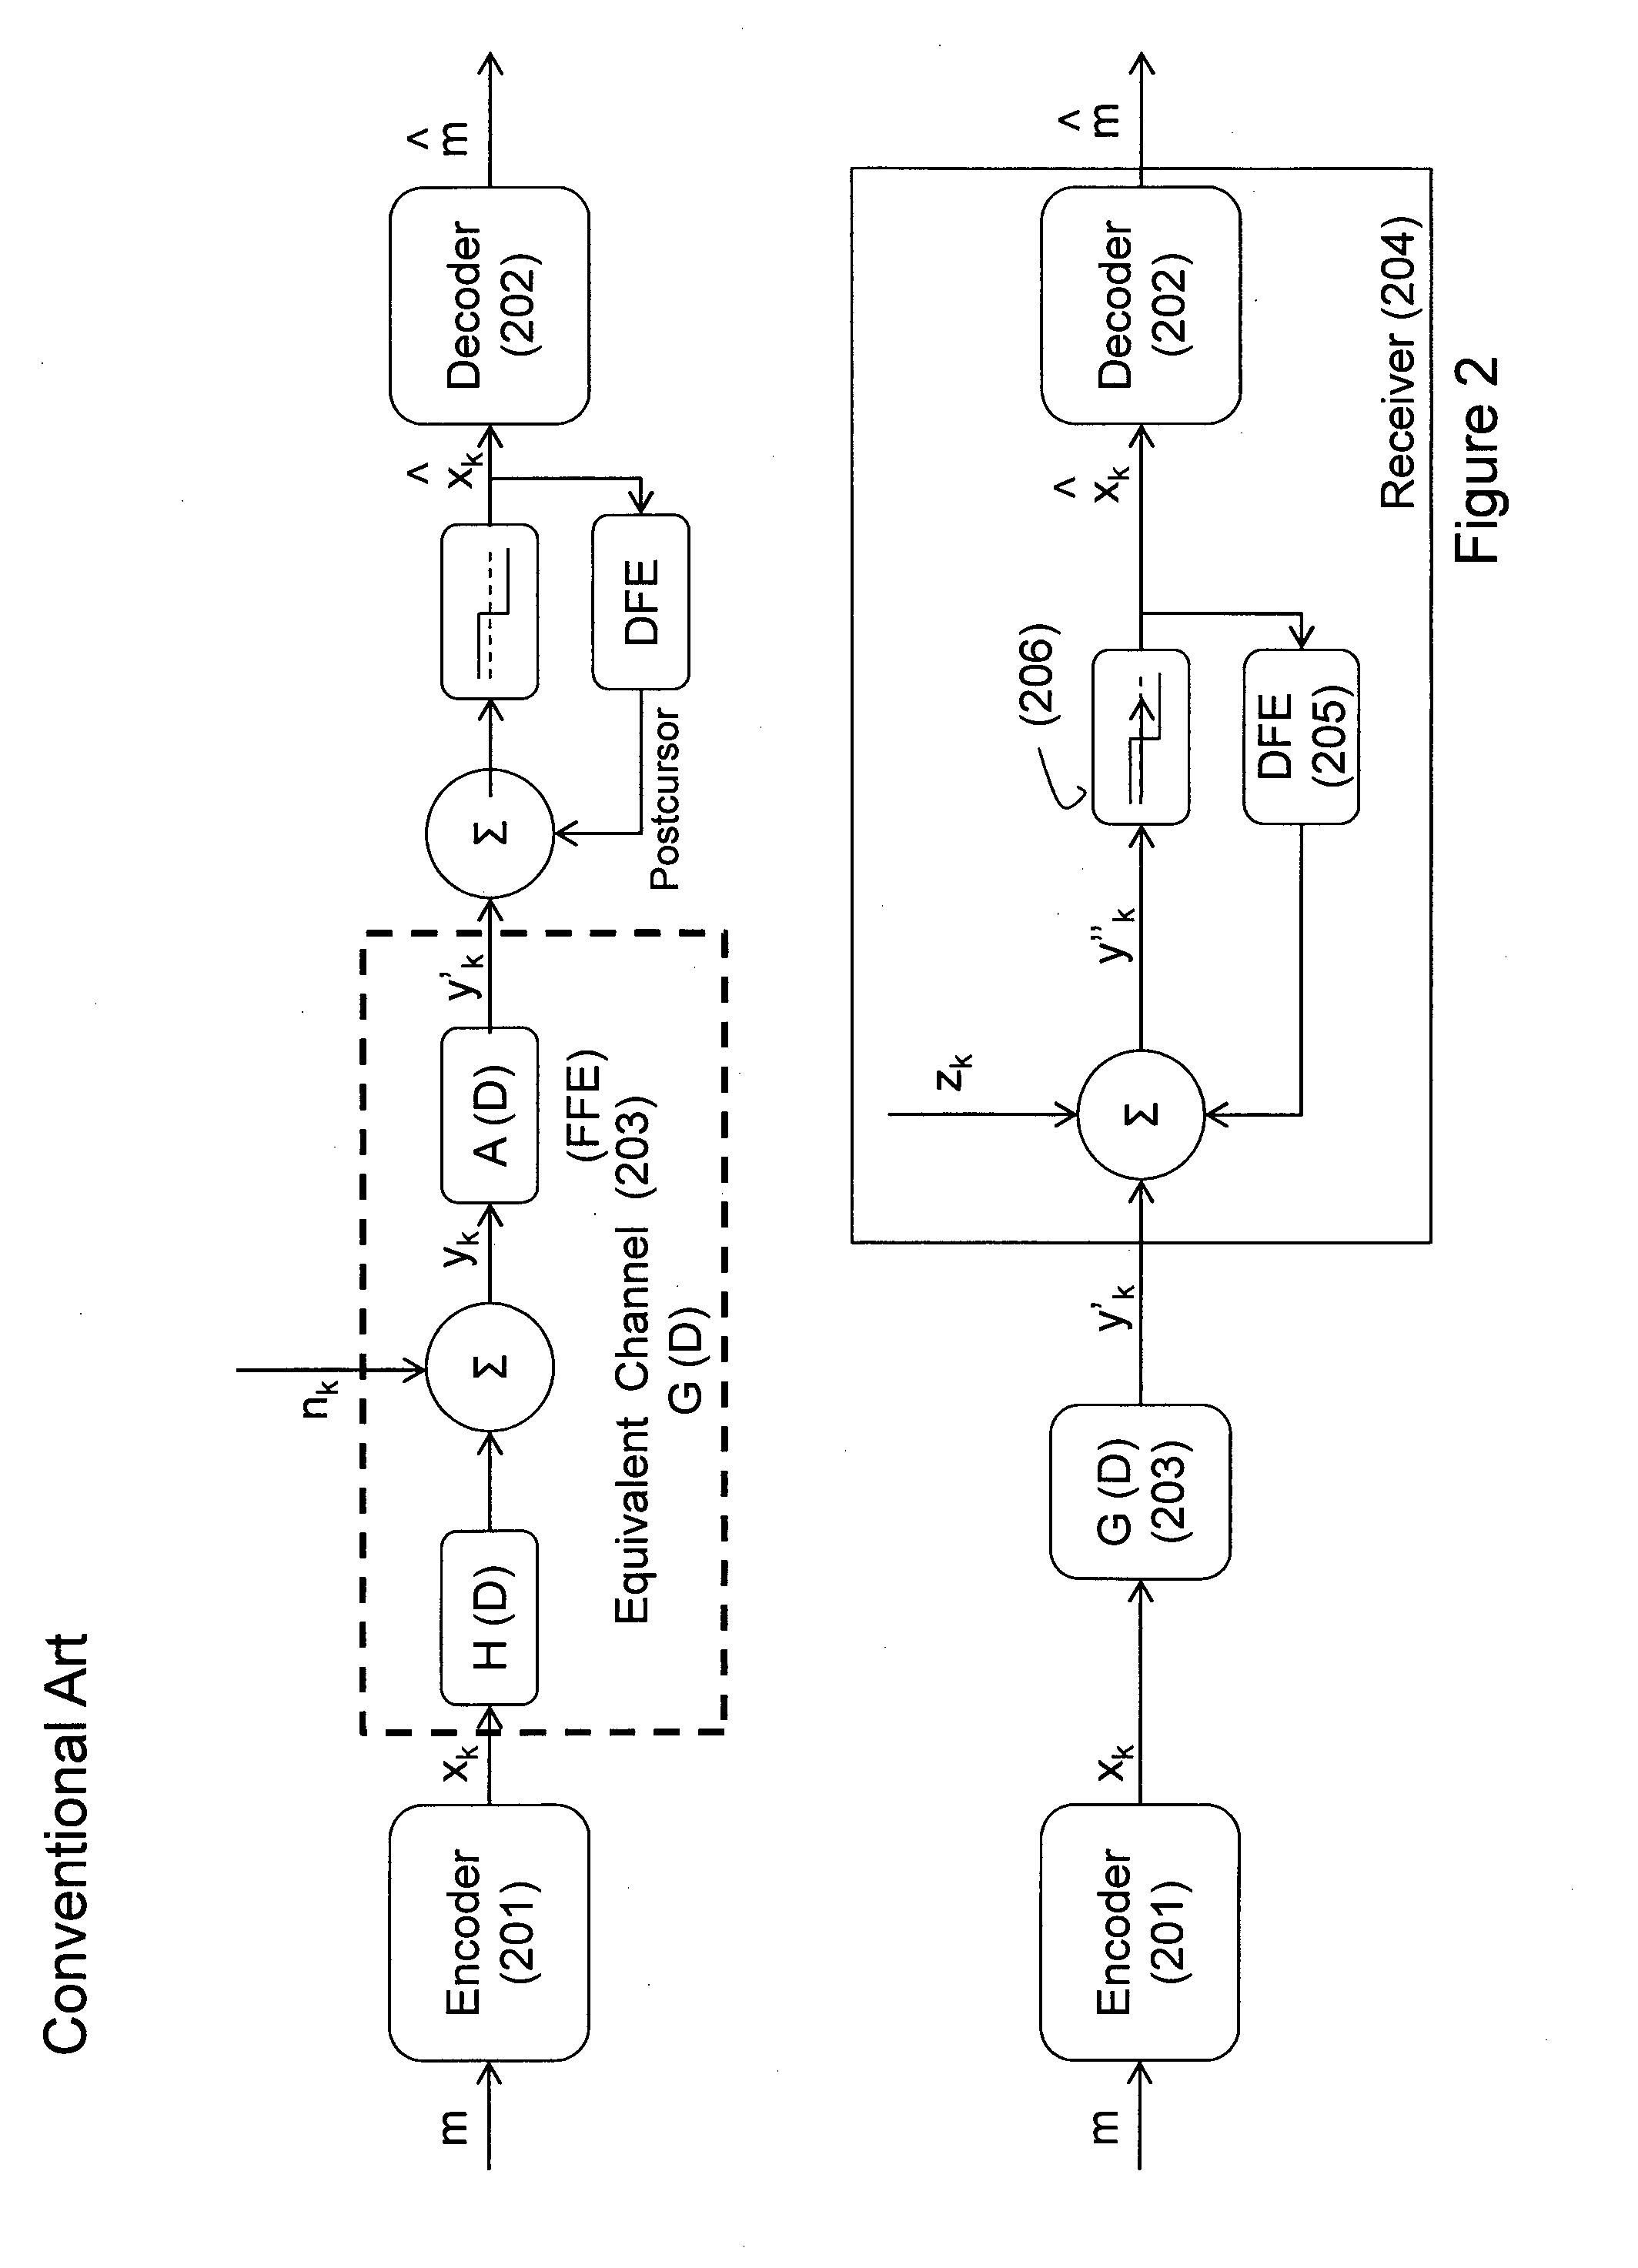 Transmission system with isi channel and method of operating thereof